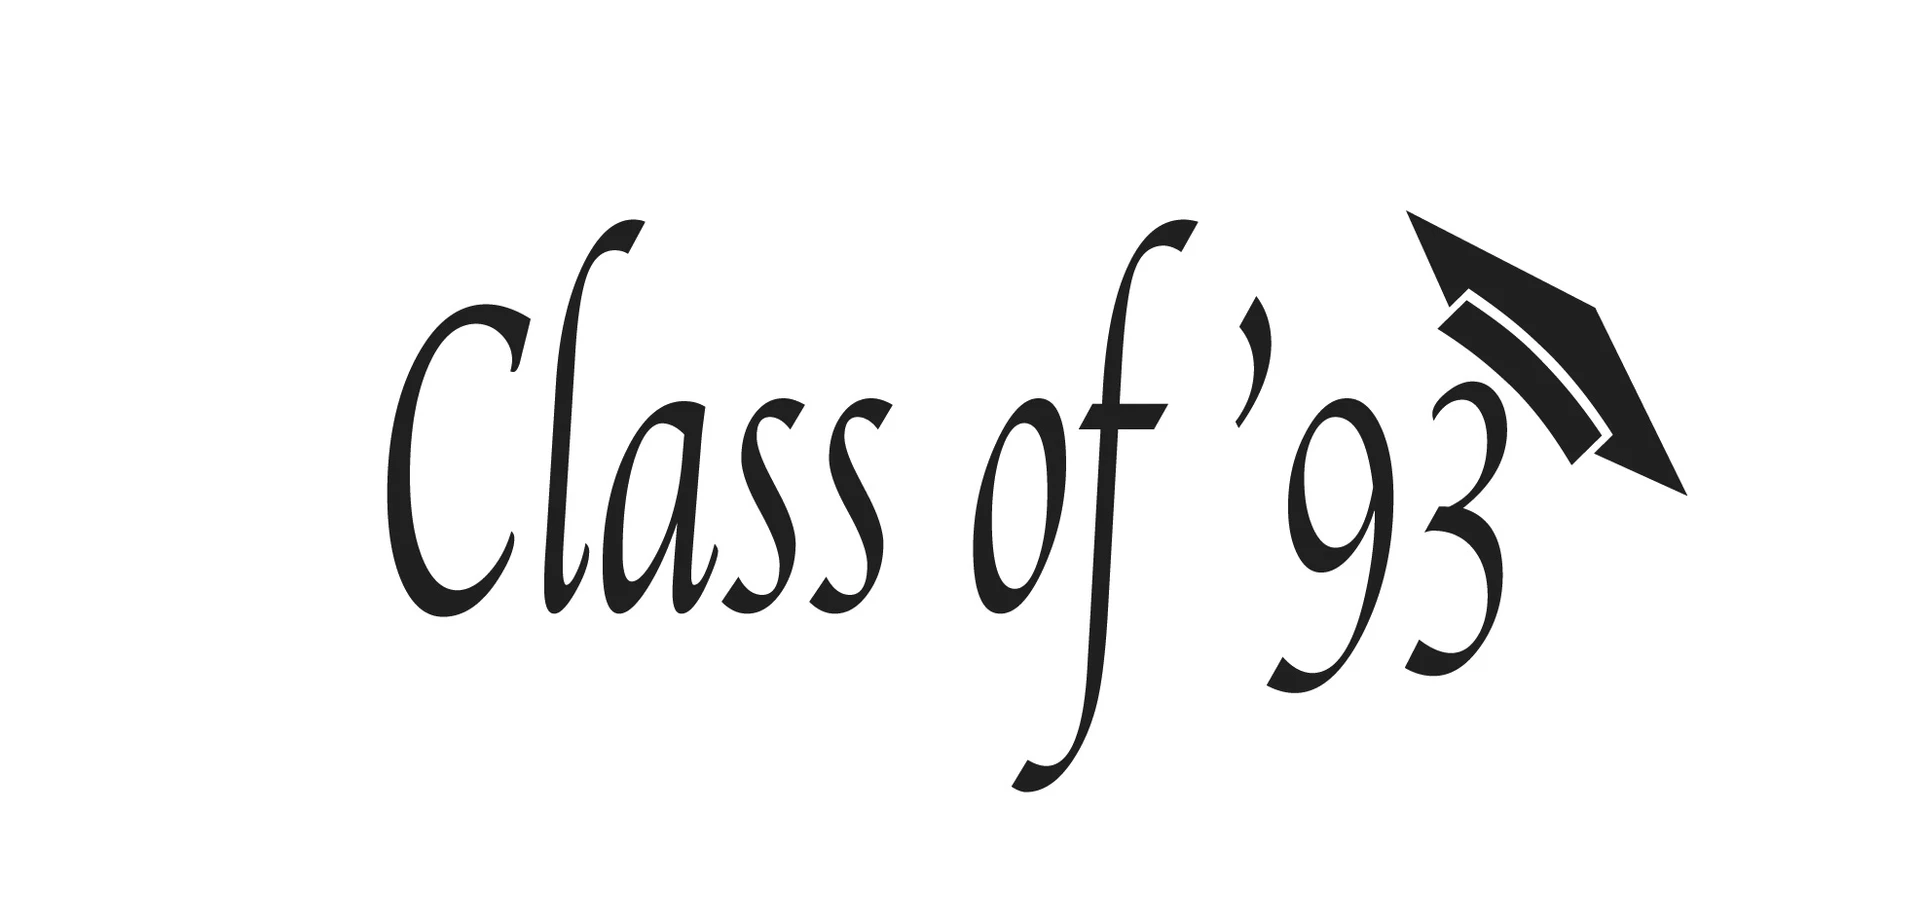 Logo that says "Class of '93" with a small graduation cap hanging over the three